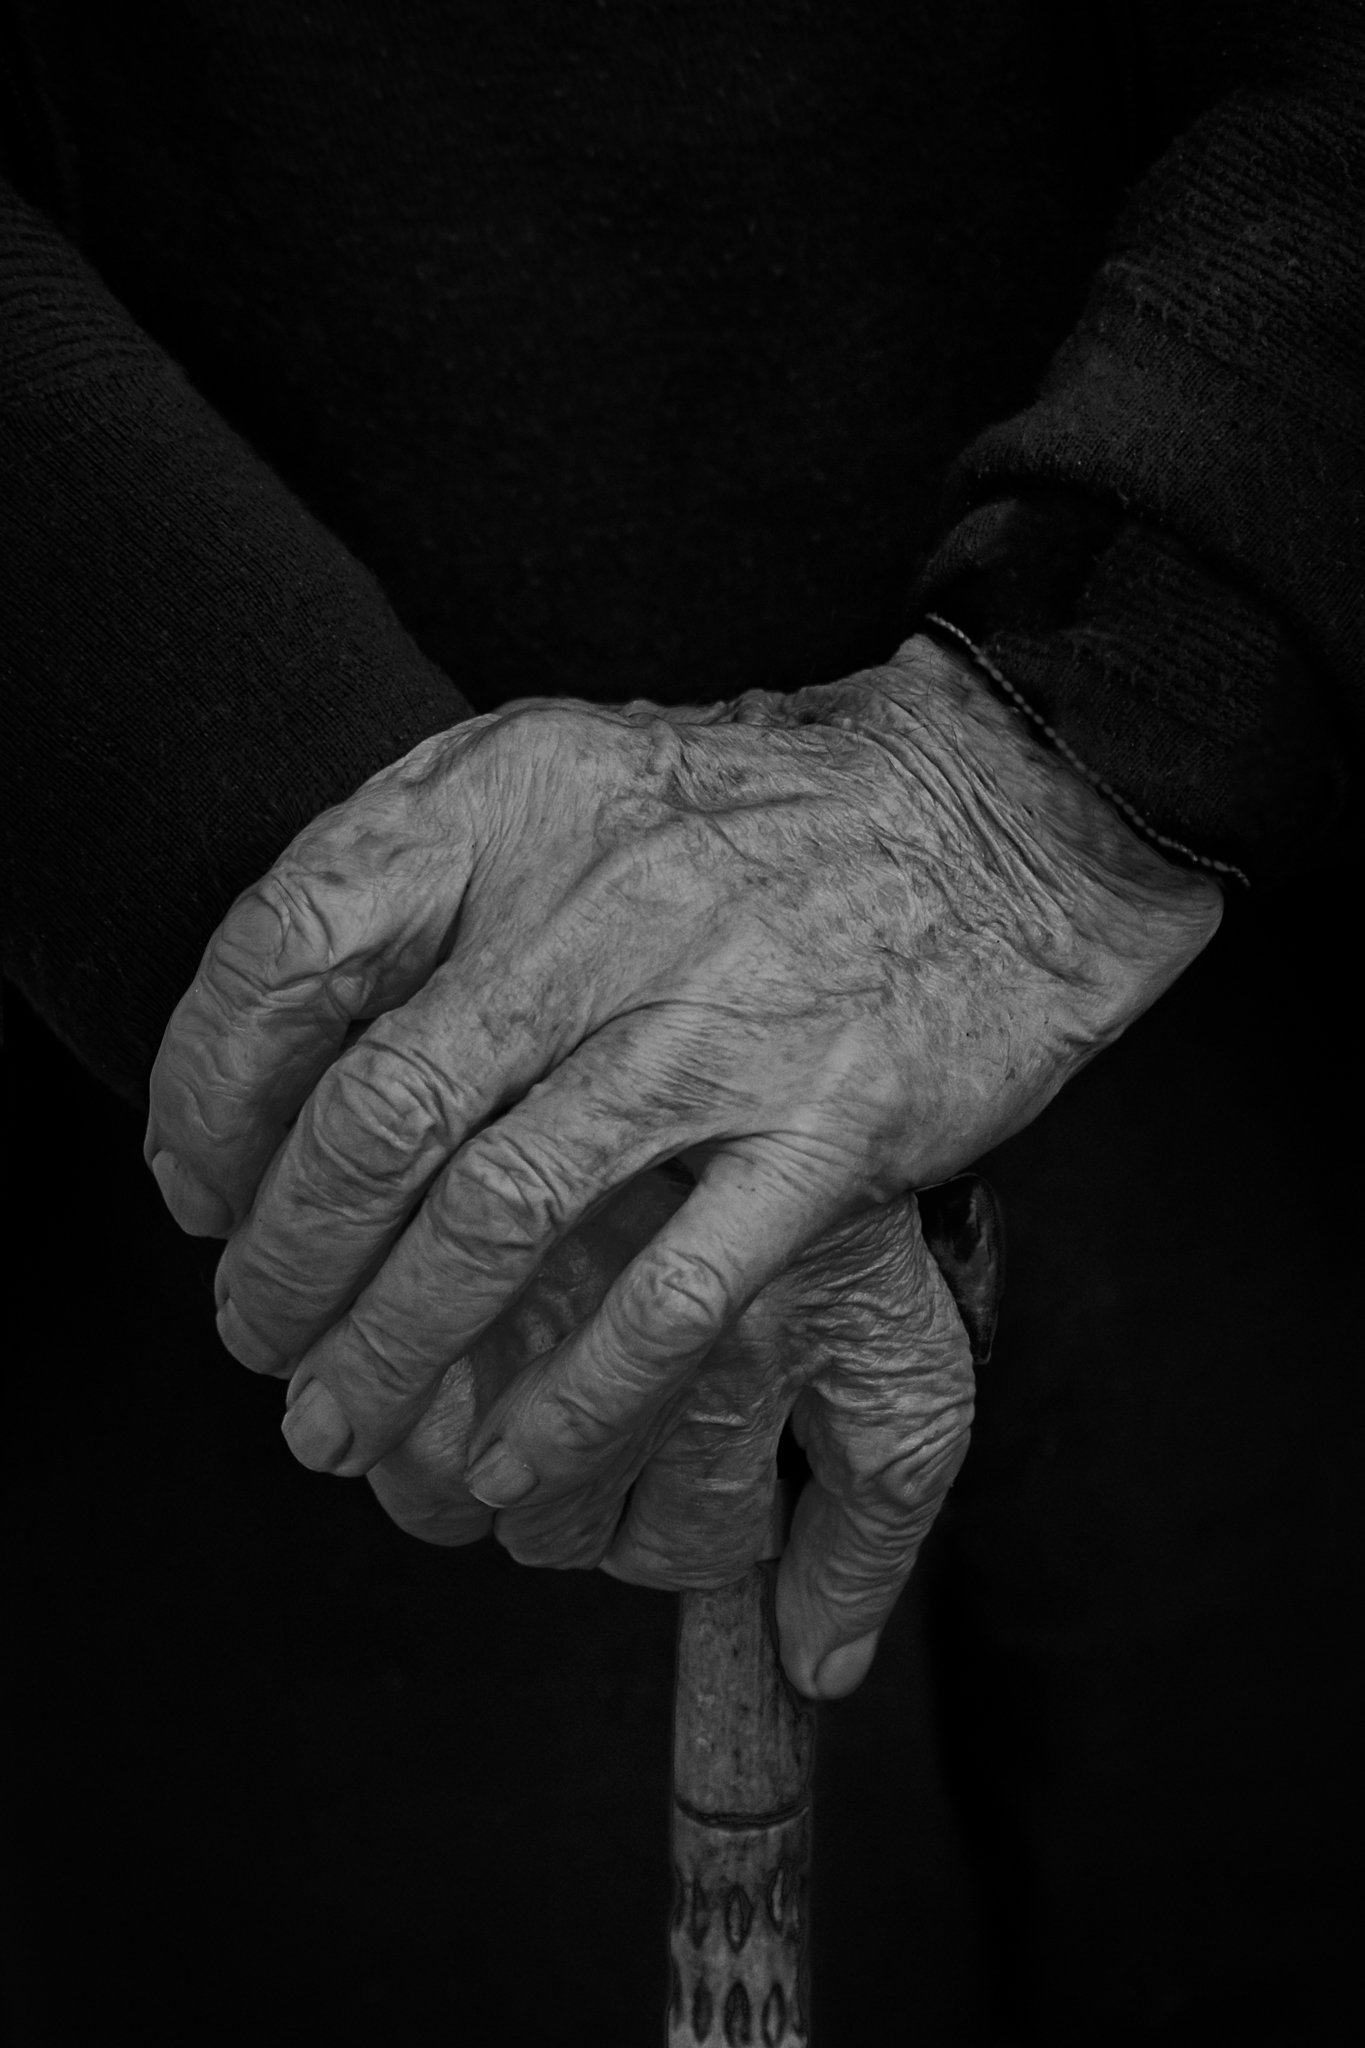 hands, black and white, sould, experience, Gestal Marcos